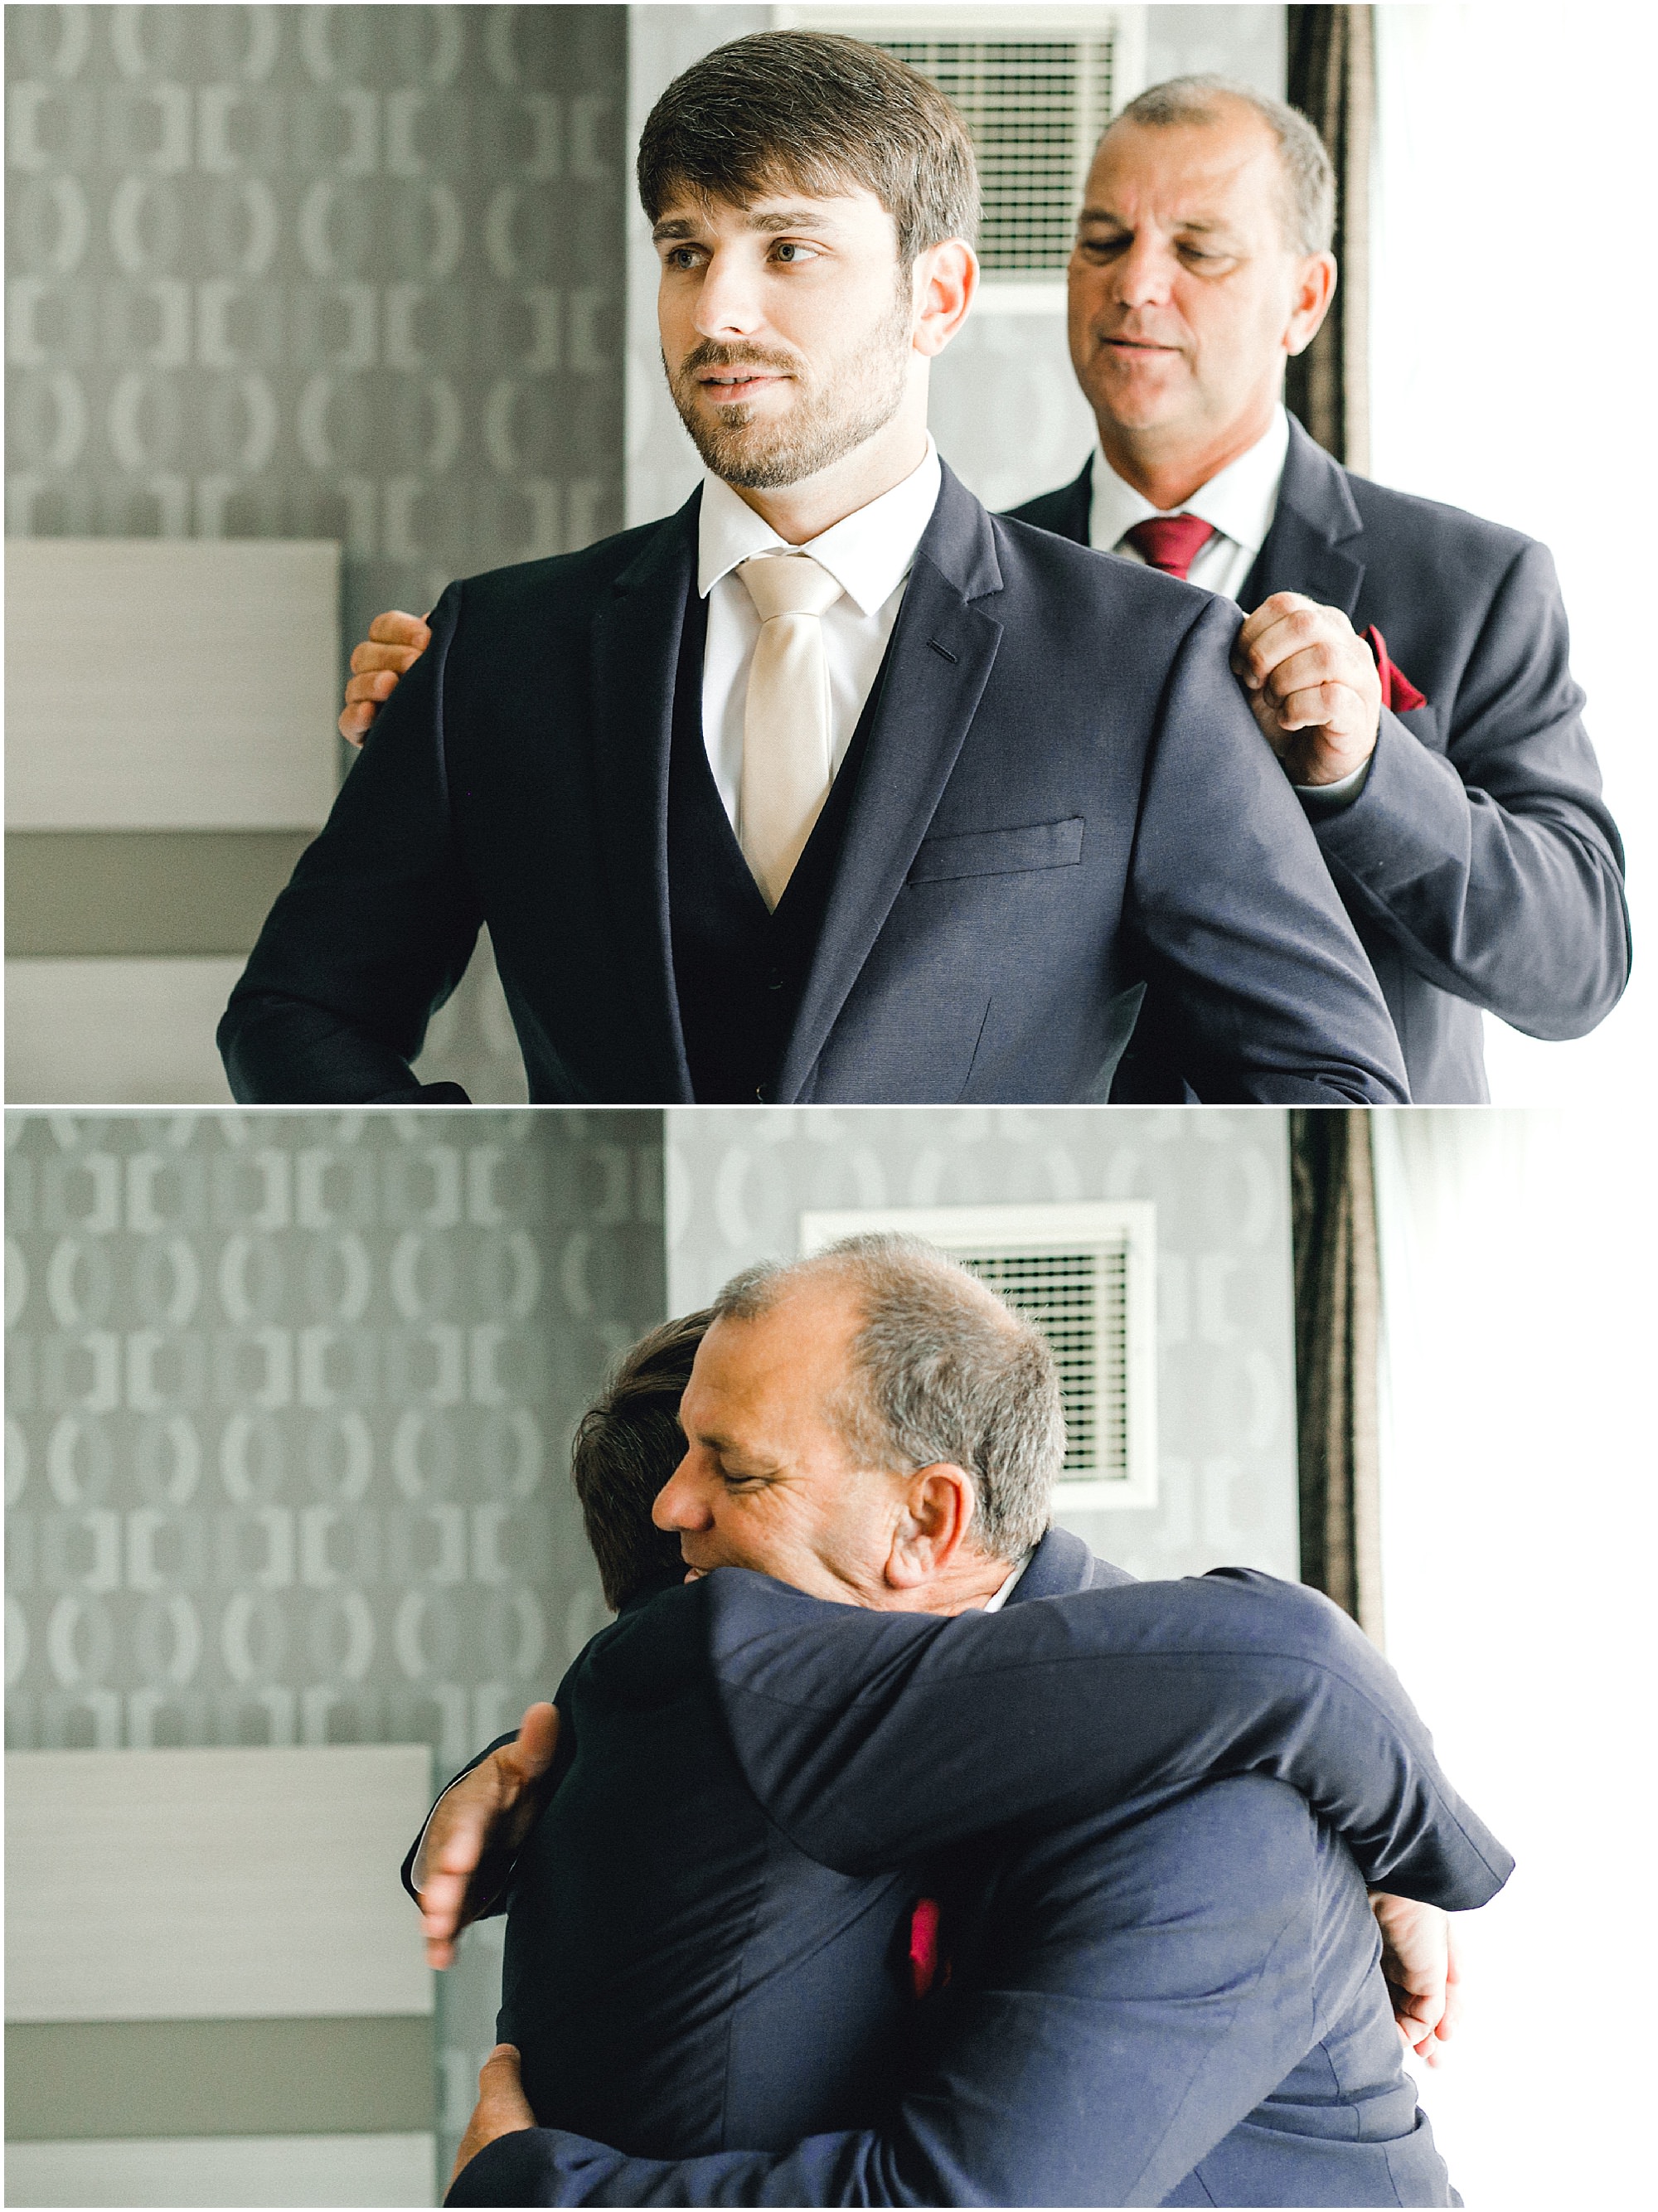 Groom's father helping him put on his jacket